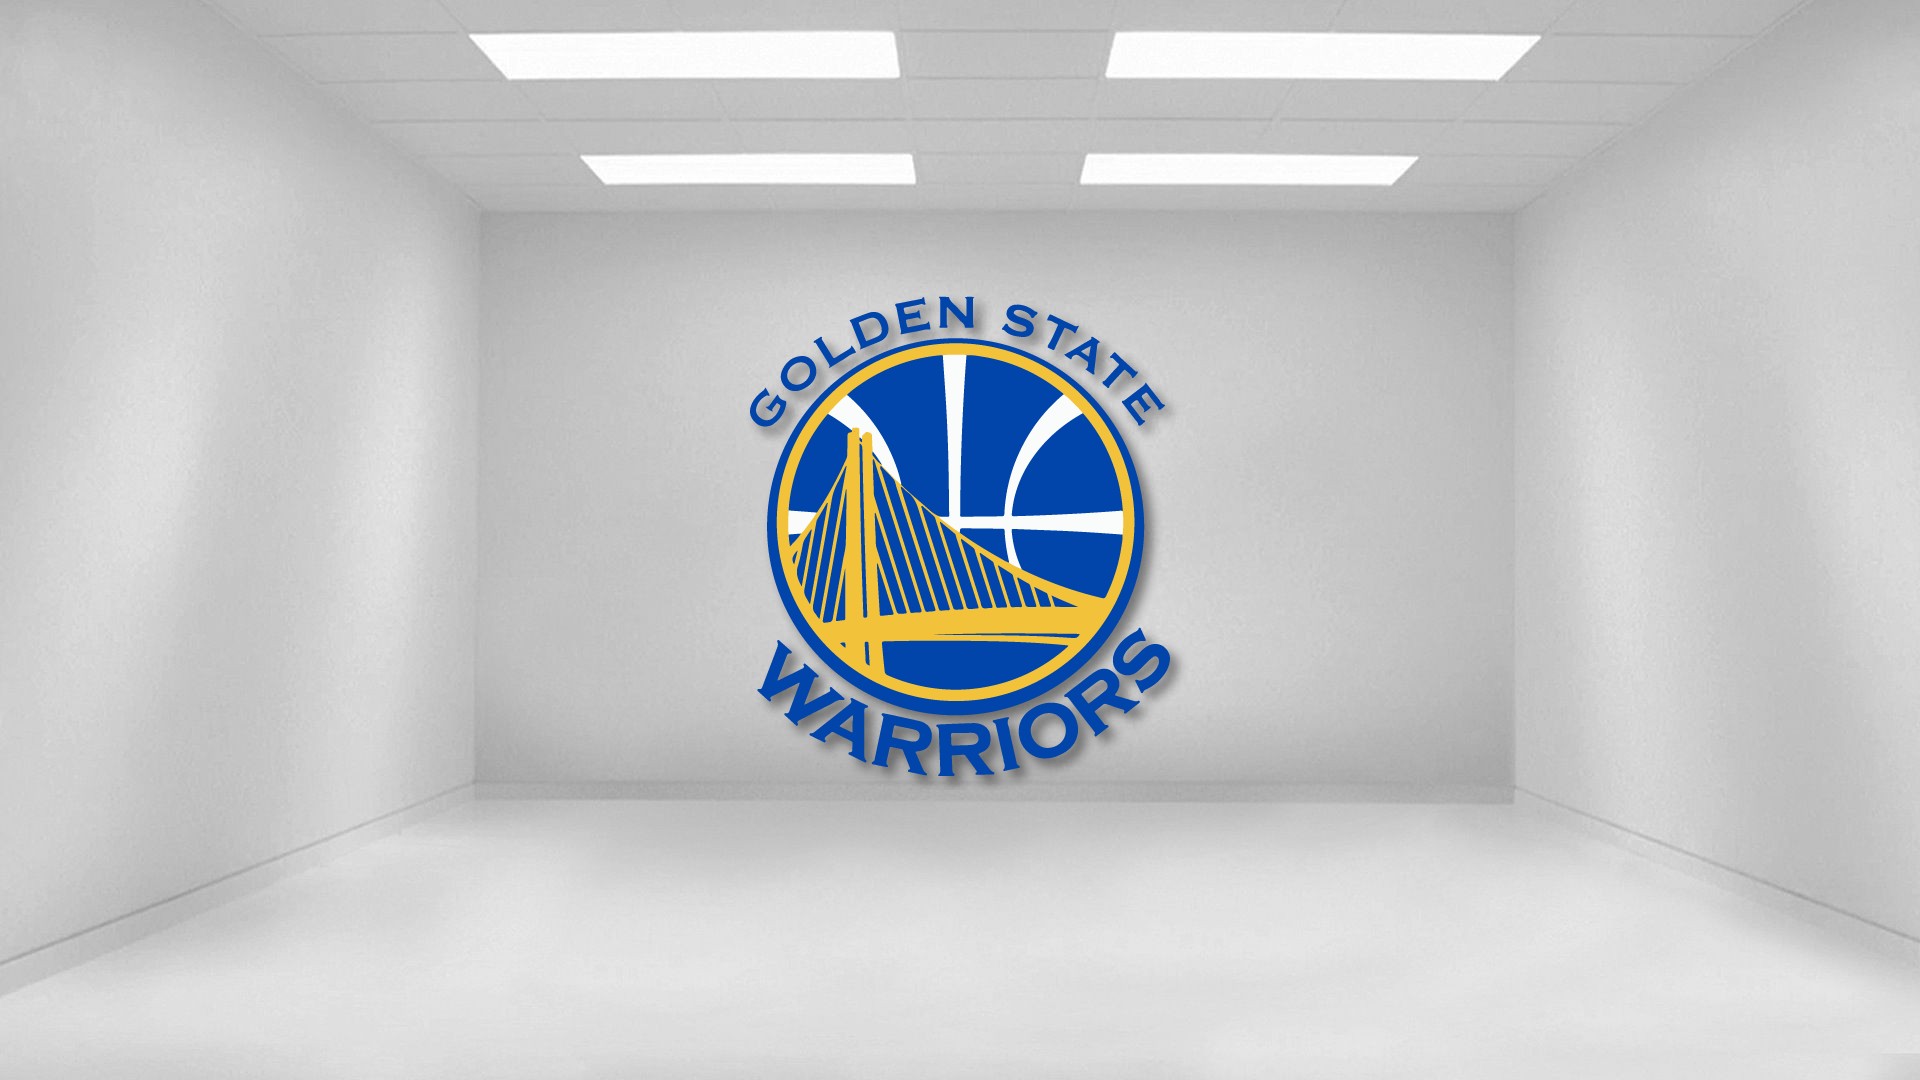 Golden State Warriors HD Wallpaper with image resolution 1920x1080 pixel. You can make this wallpaper for your Desktop Computer Backgrounds, Mac Wallpapers, Android Lock screen or iPhone Screensavers